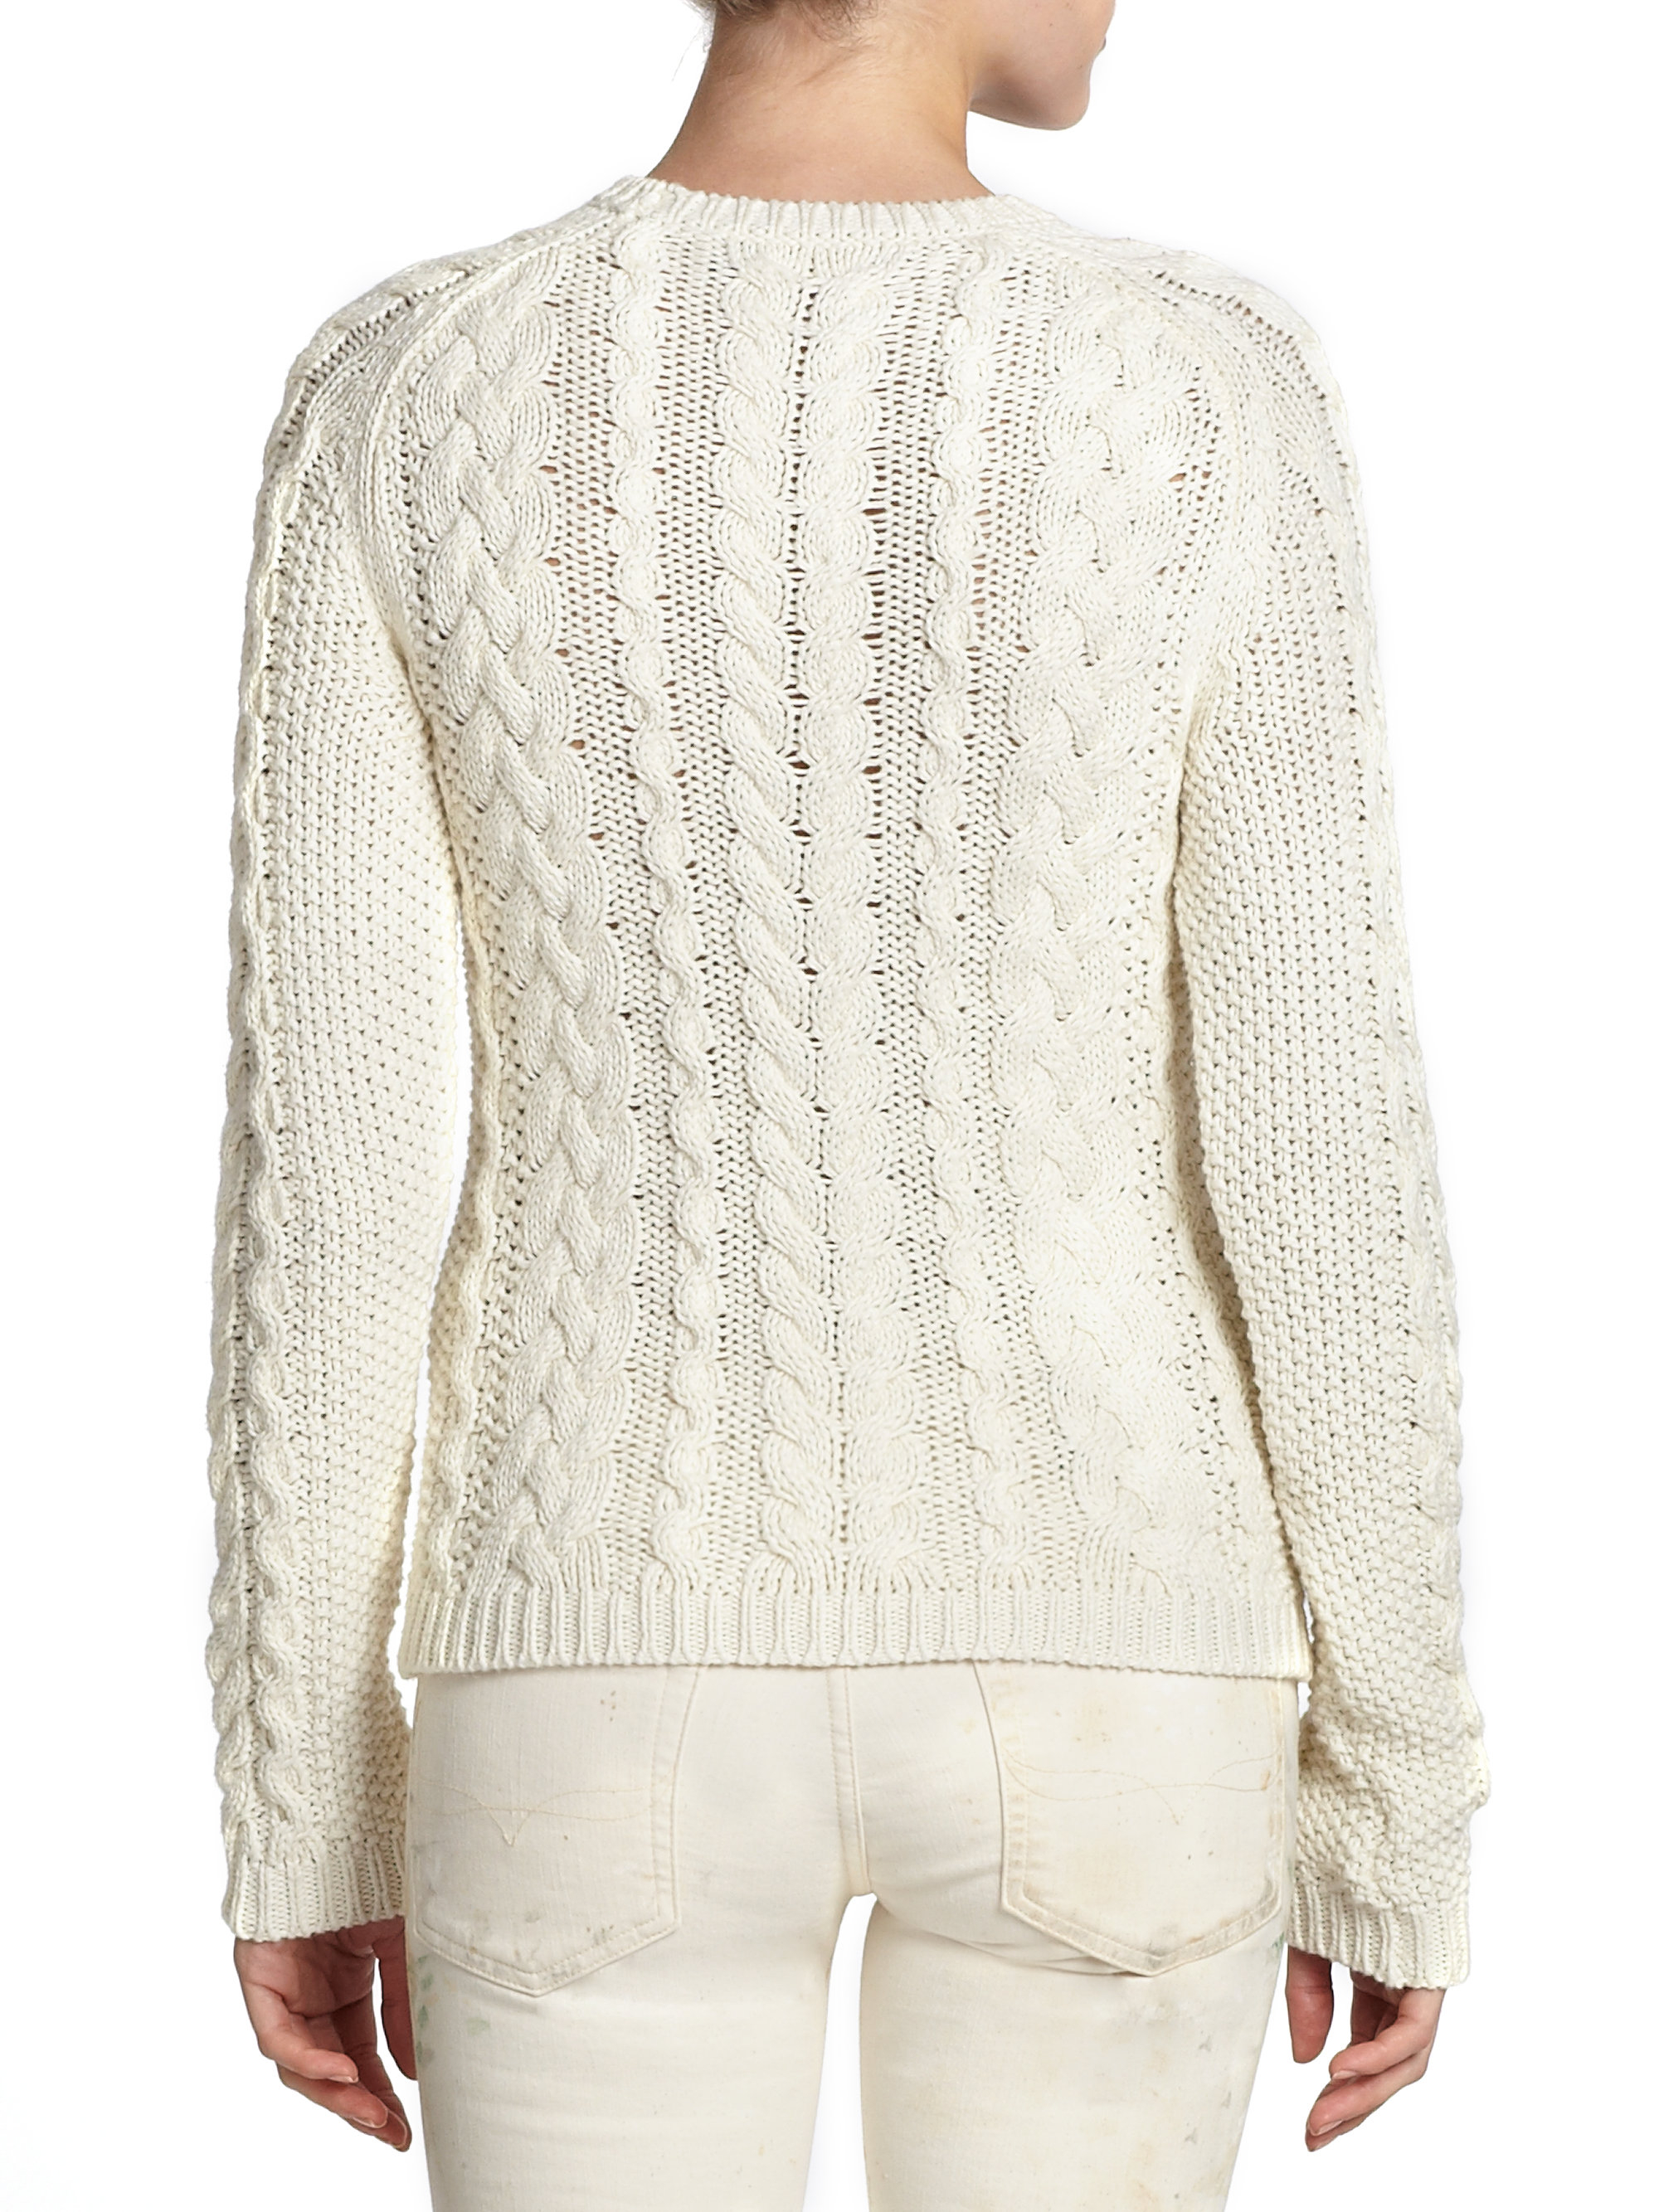 Polo ralph lauren Cotton Cable-Knit Sweater in Natural | Lyst